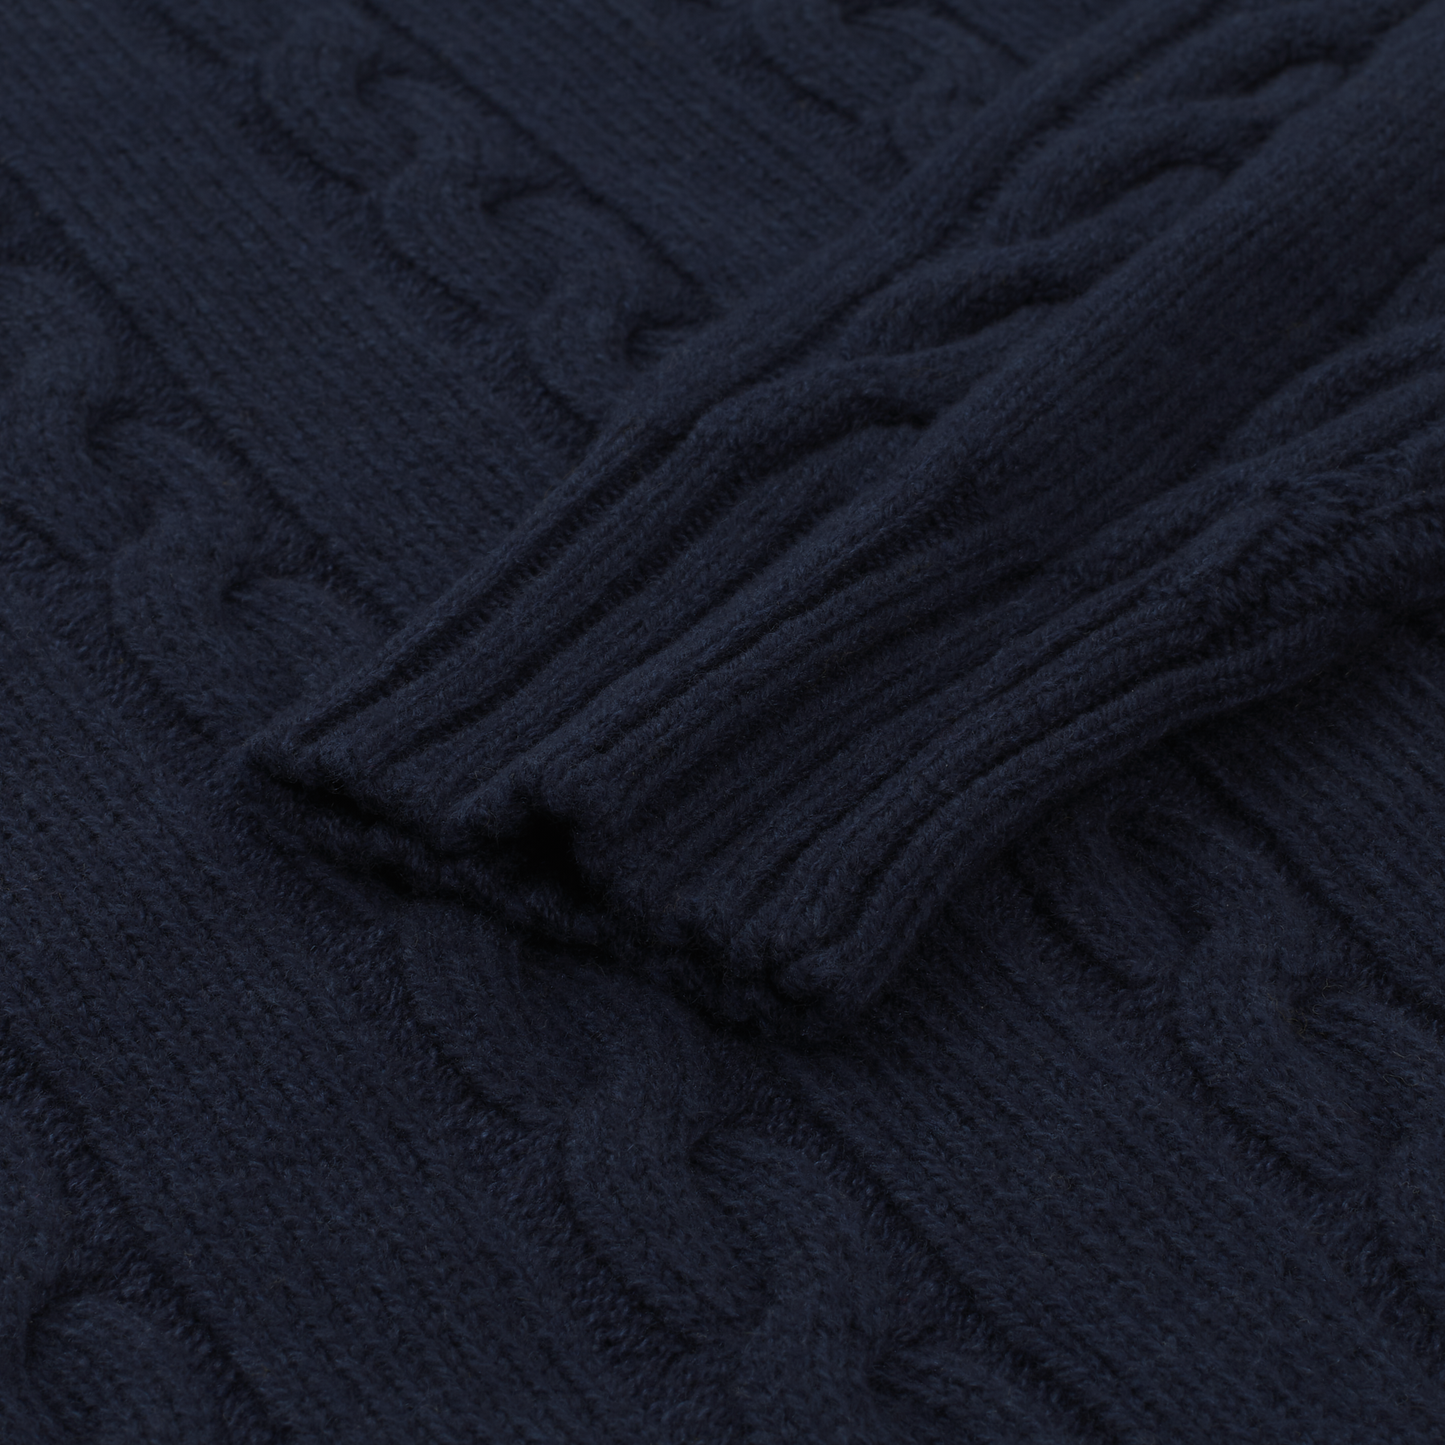 Luciano Barbera Turtleneck Cable-Knit Wool, Silk and Cashmere-Blend Sweater in Navy Blue - SARTALE